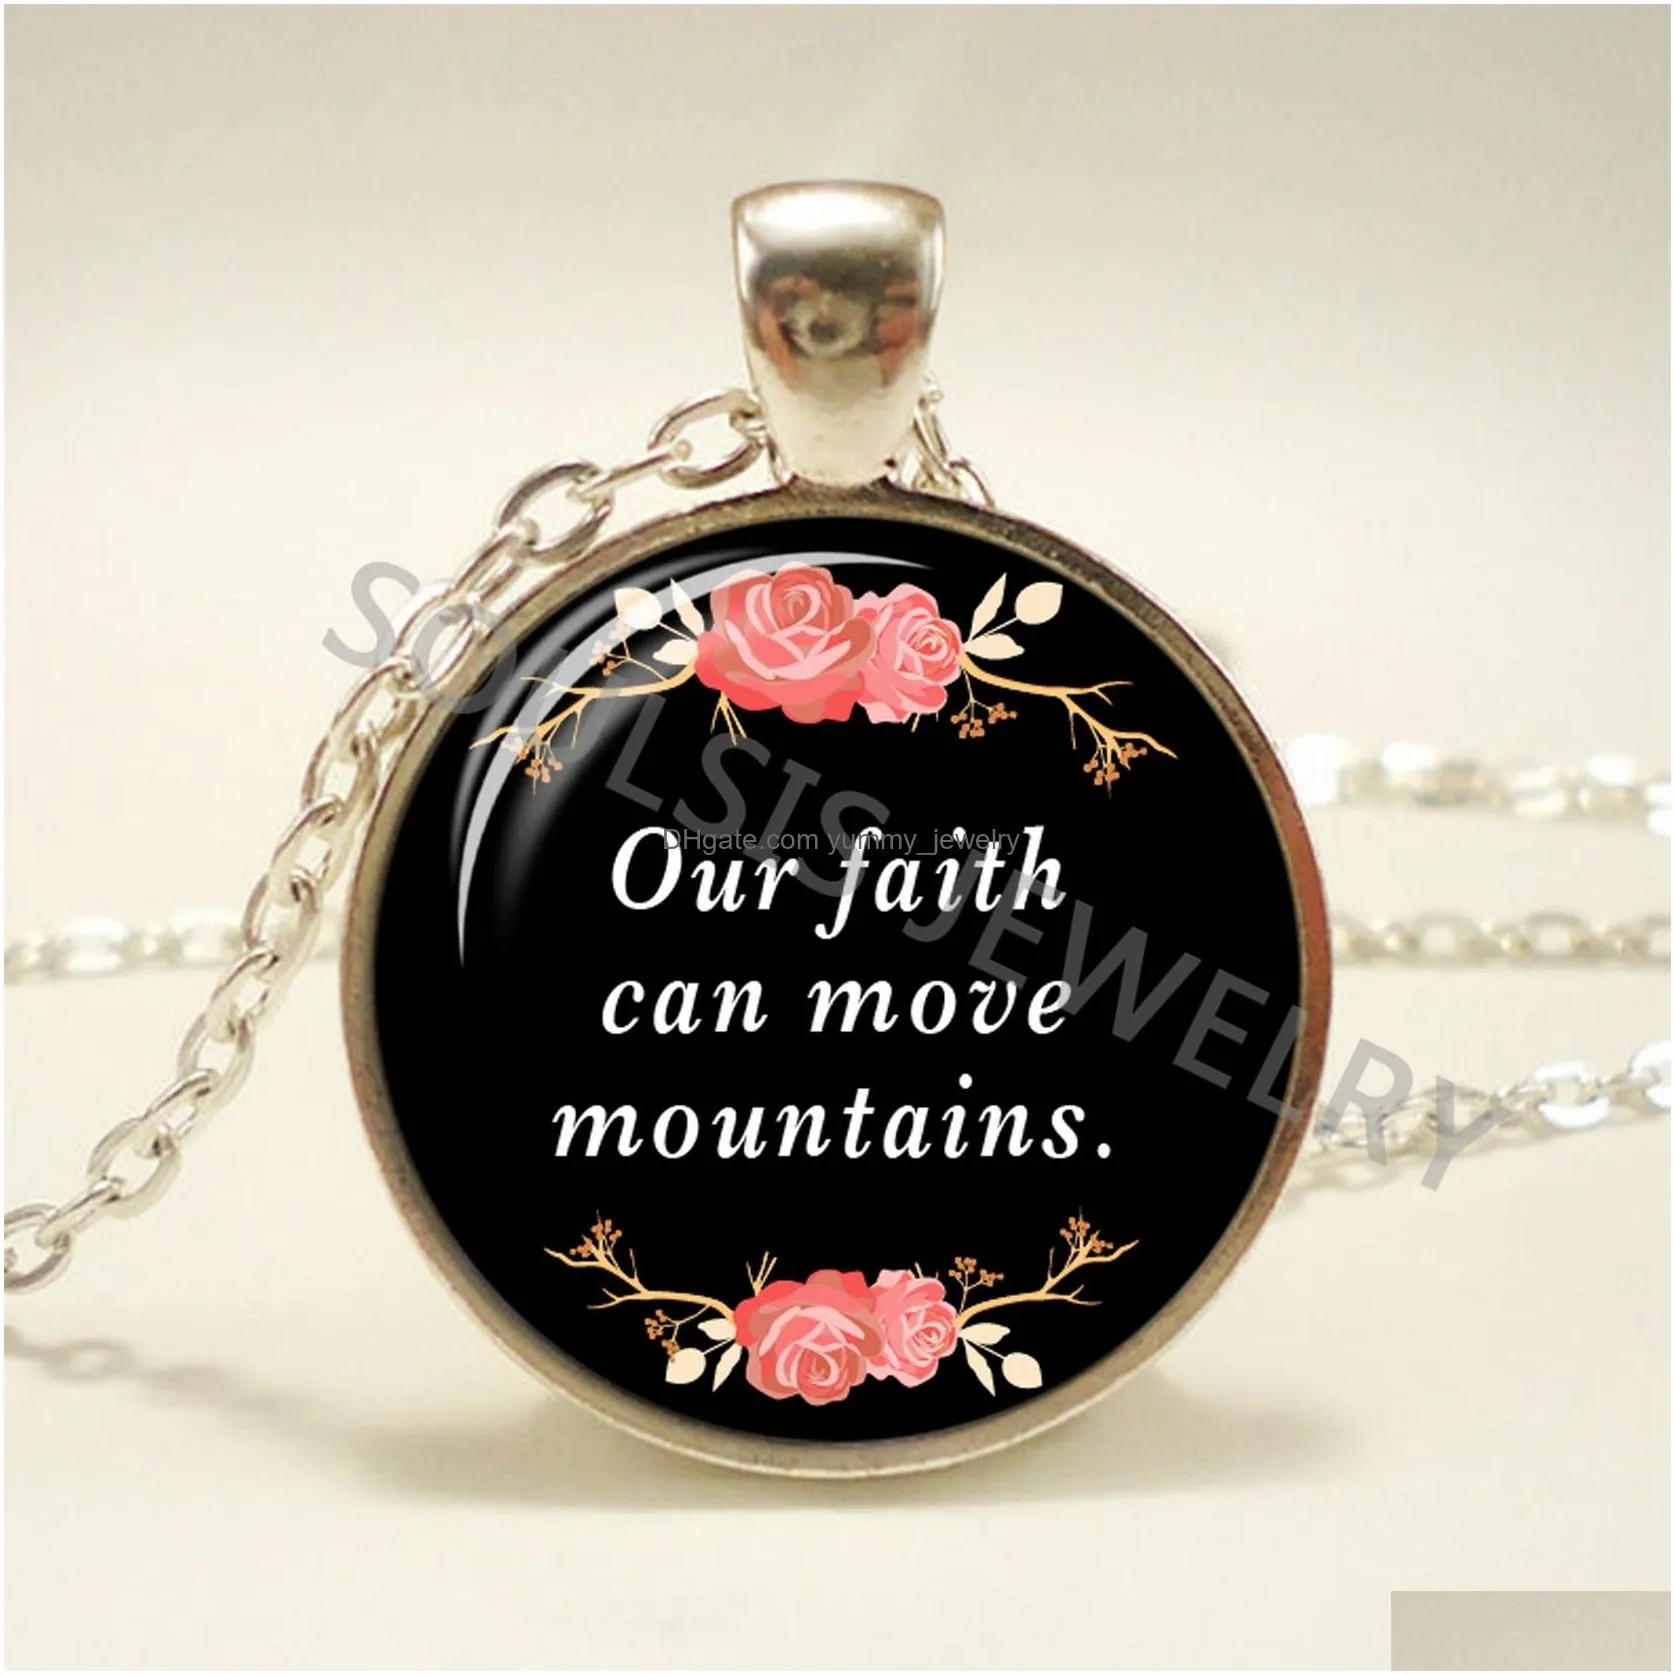 new fashion bible verse necklace with god all things are possible scripture quote jewelry for women men christian faith gift